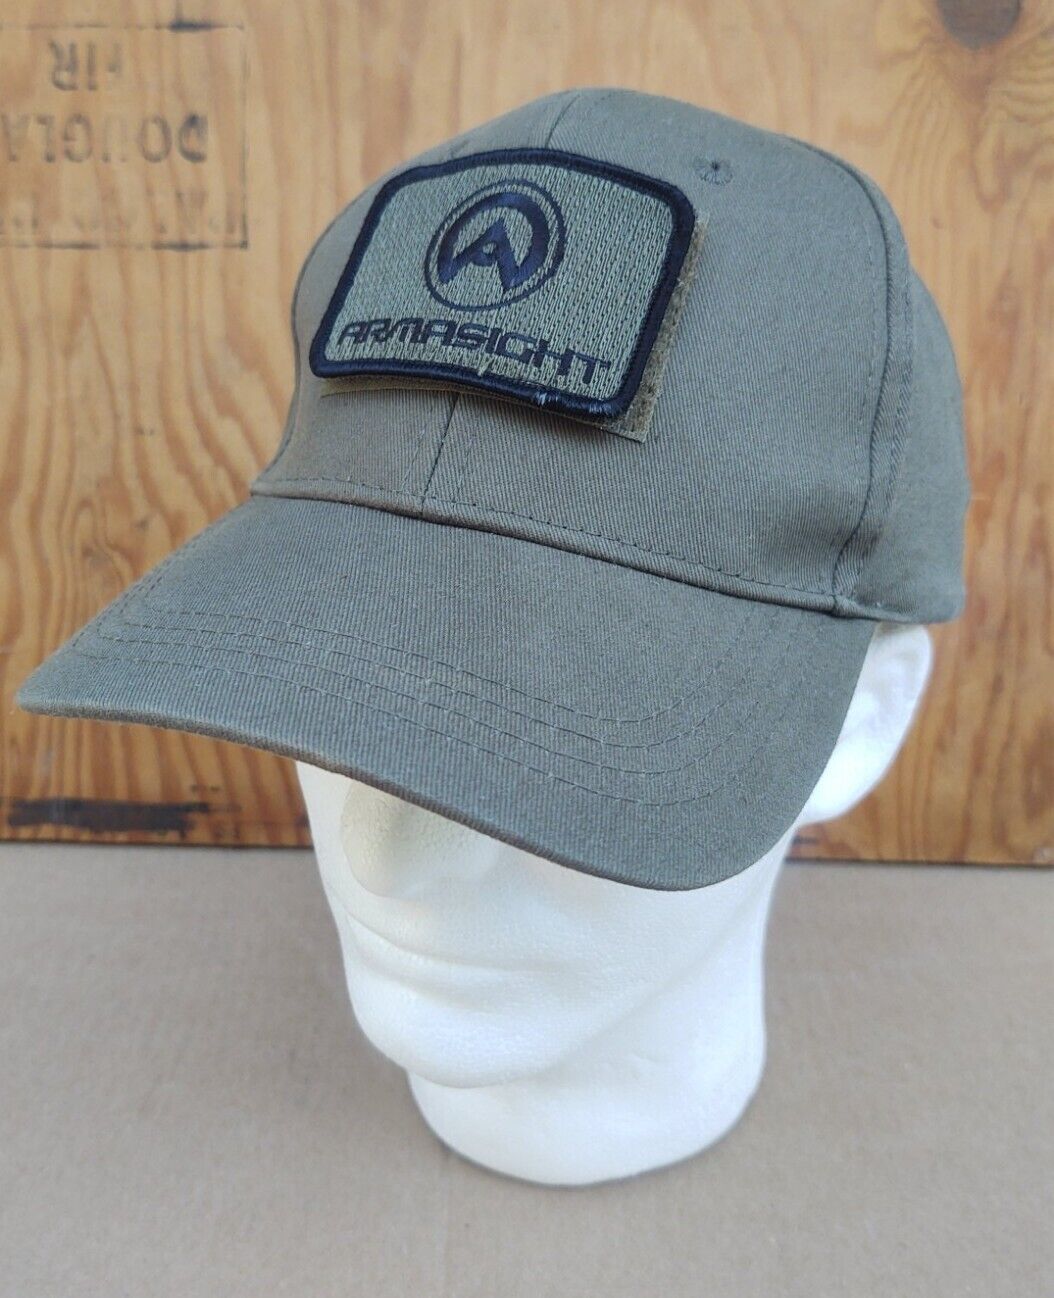 Vintage Armasight New Adjustable Hat Cap With Removable Patch